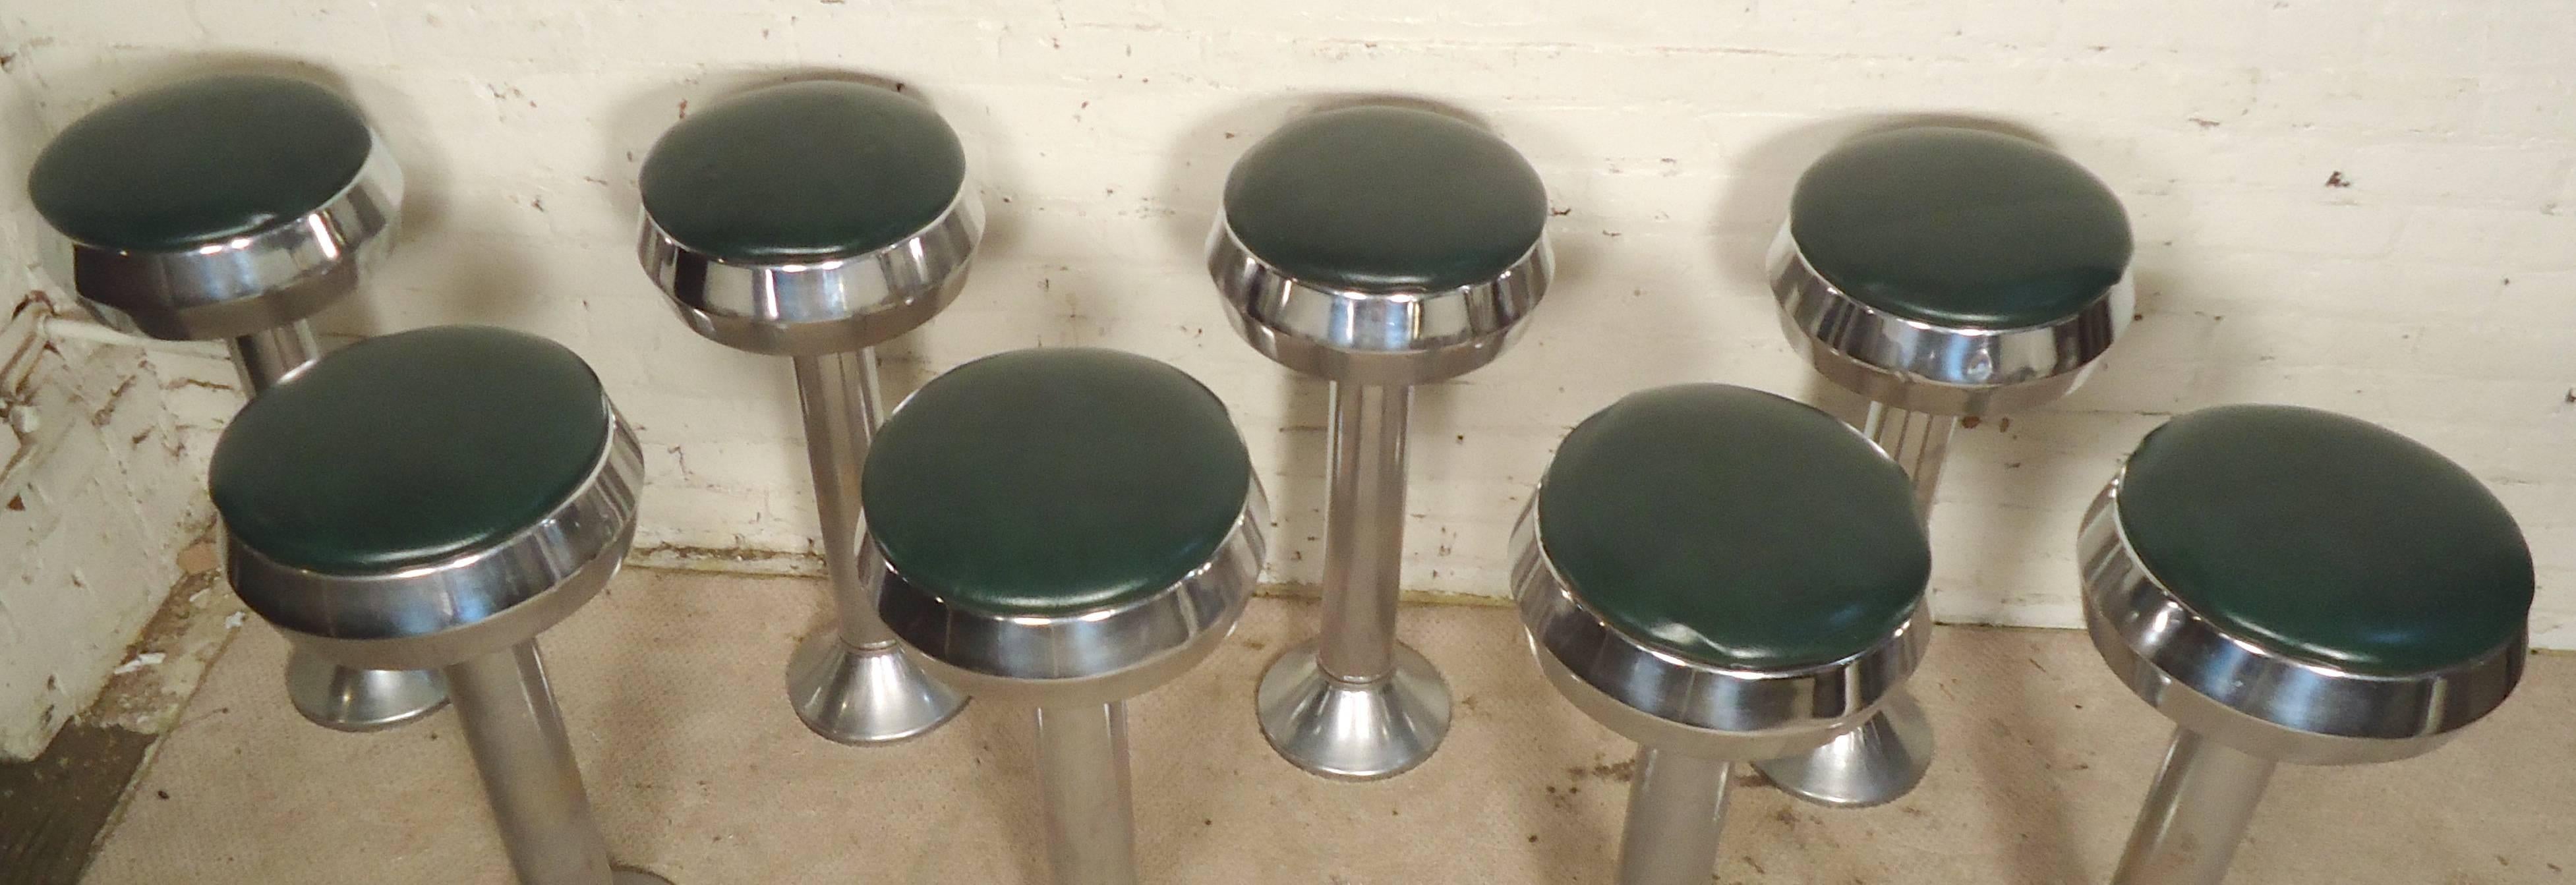 This set of swivel stools comes straight from the 1950's ice cream parlor. Heavy polished chrome and green vinyl seats. [PRICE IS FOR ONE]

(Please confirm item location - NY or NJ - with dealer)
